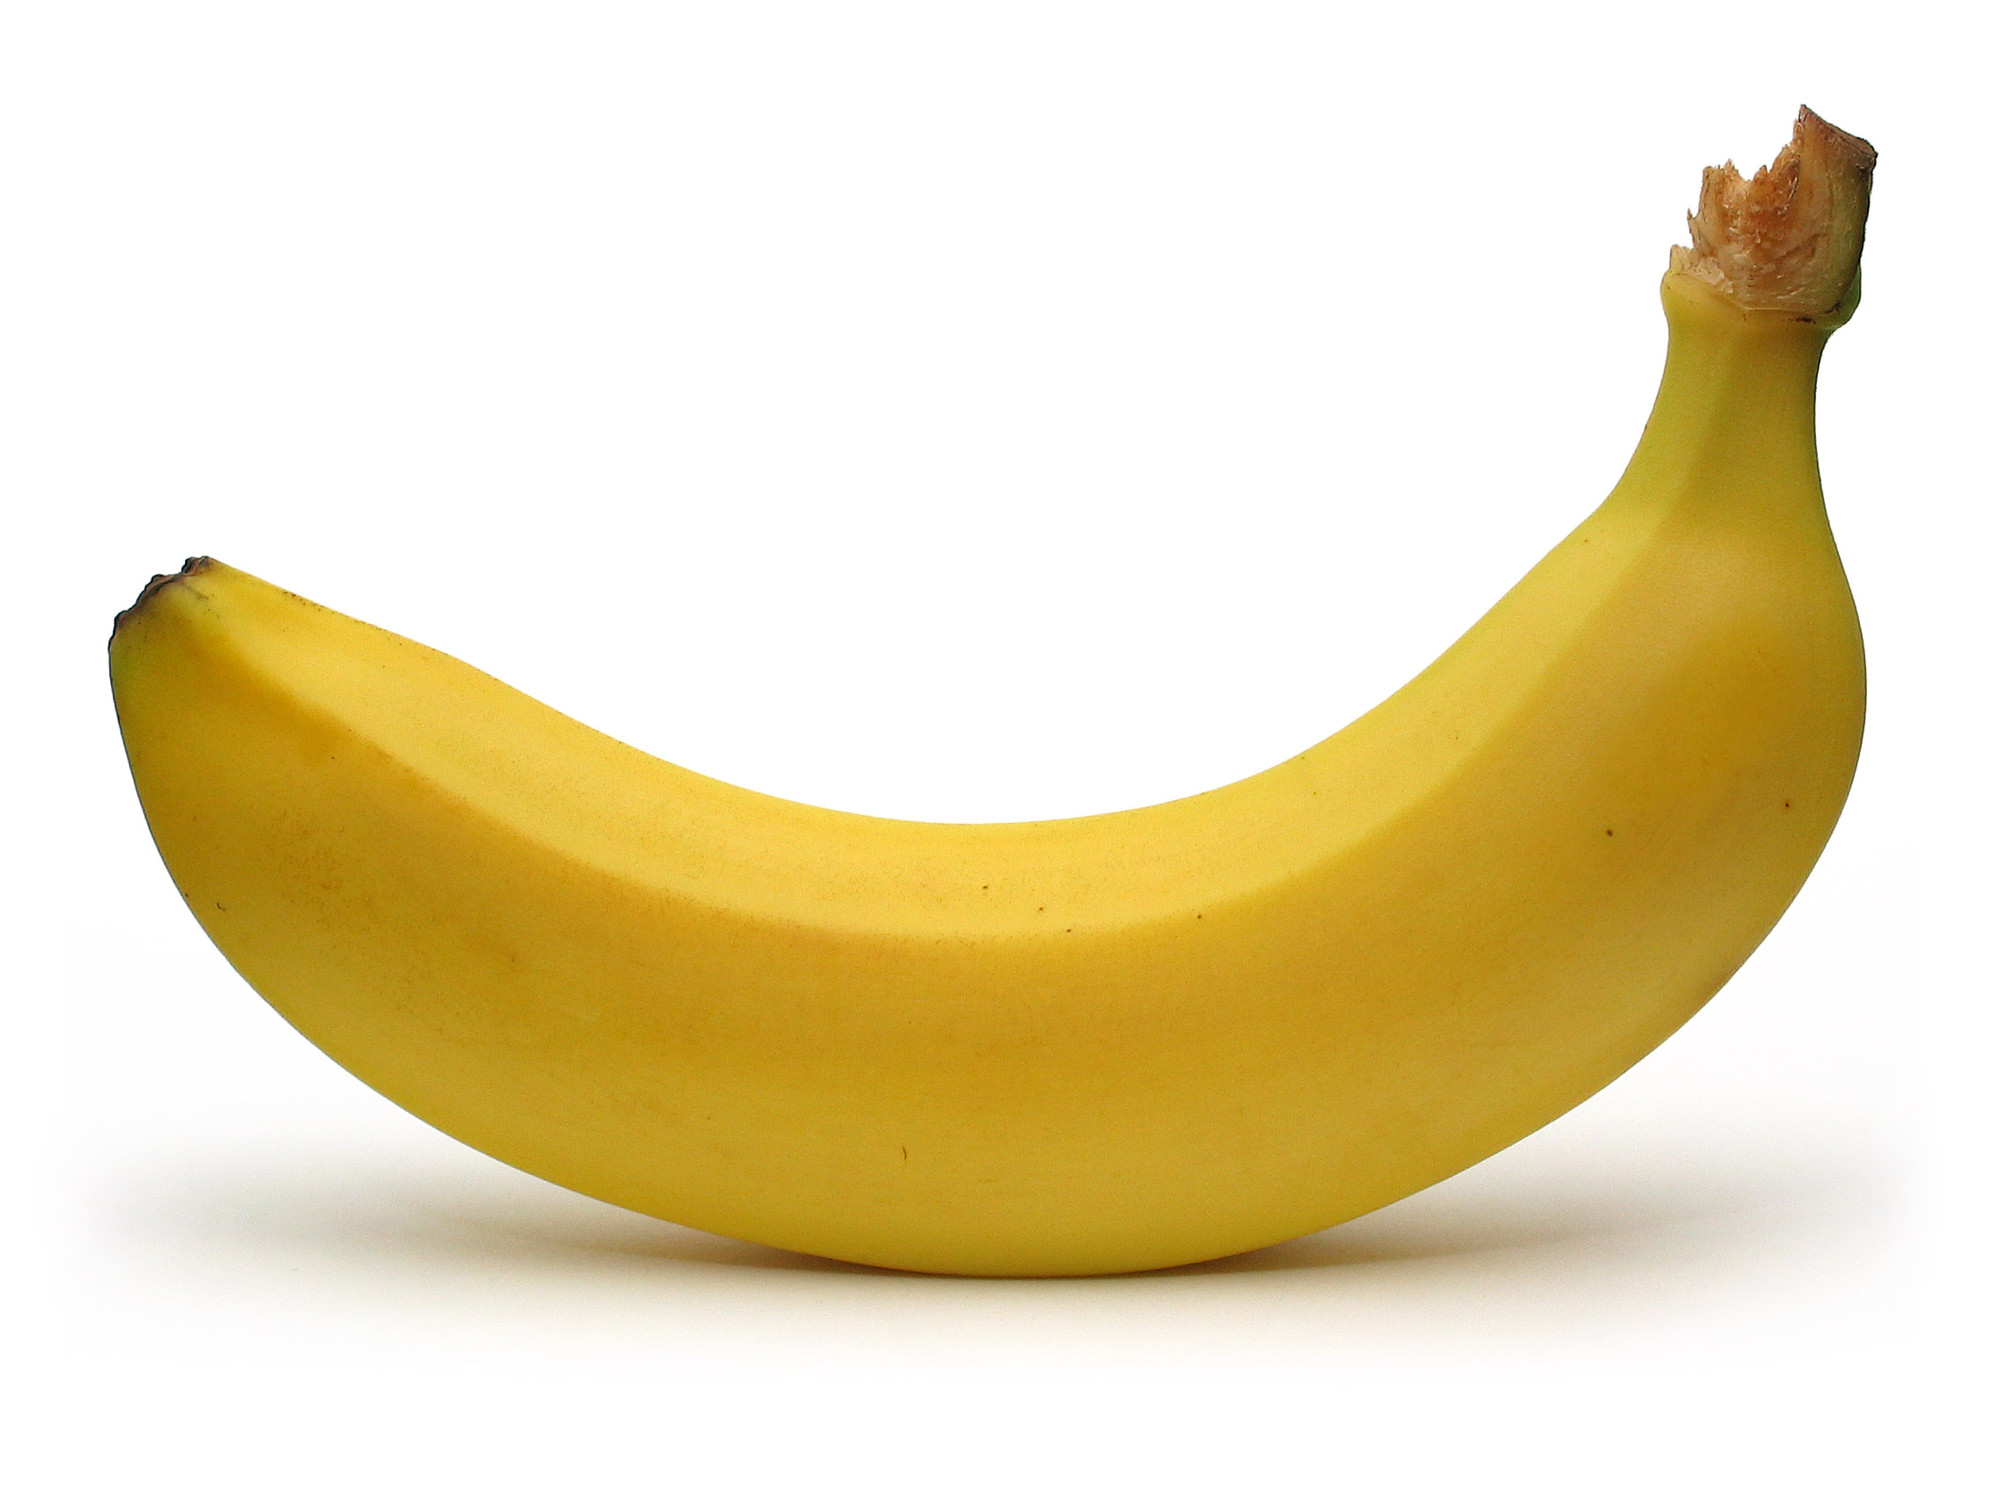 Banana on white background, download photo, clipart